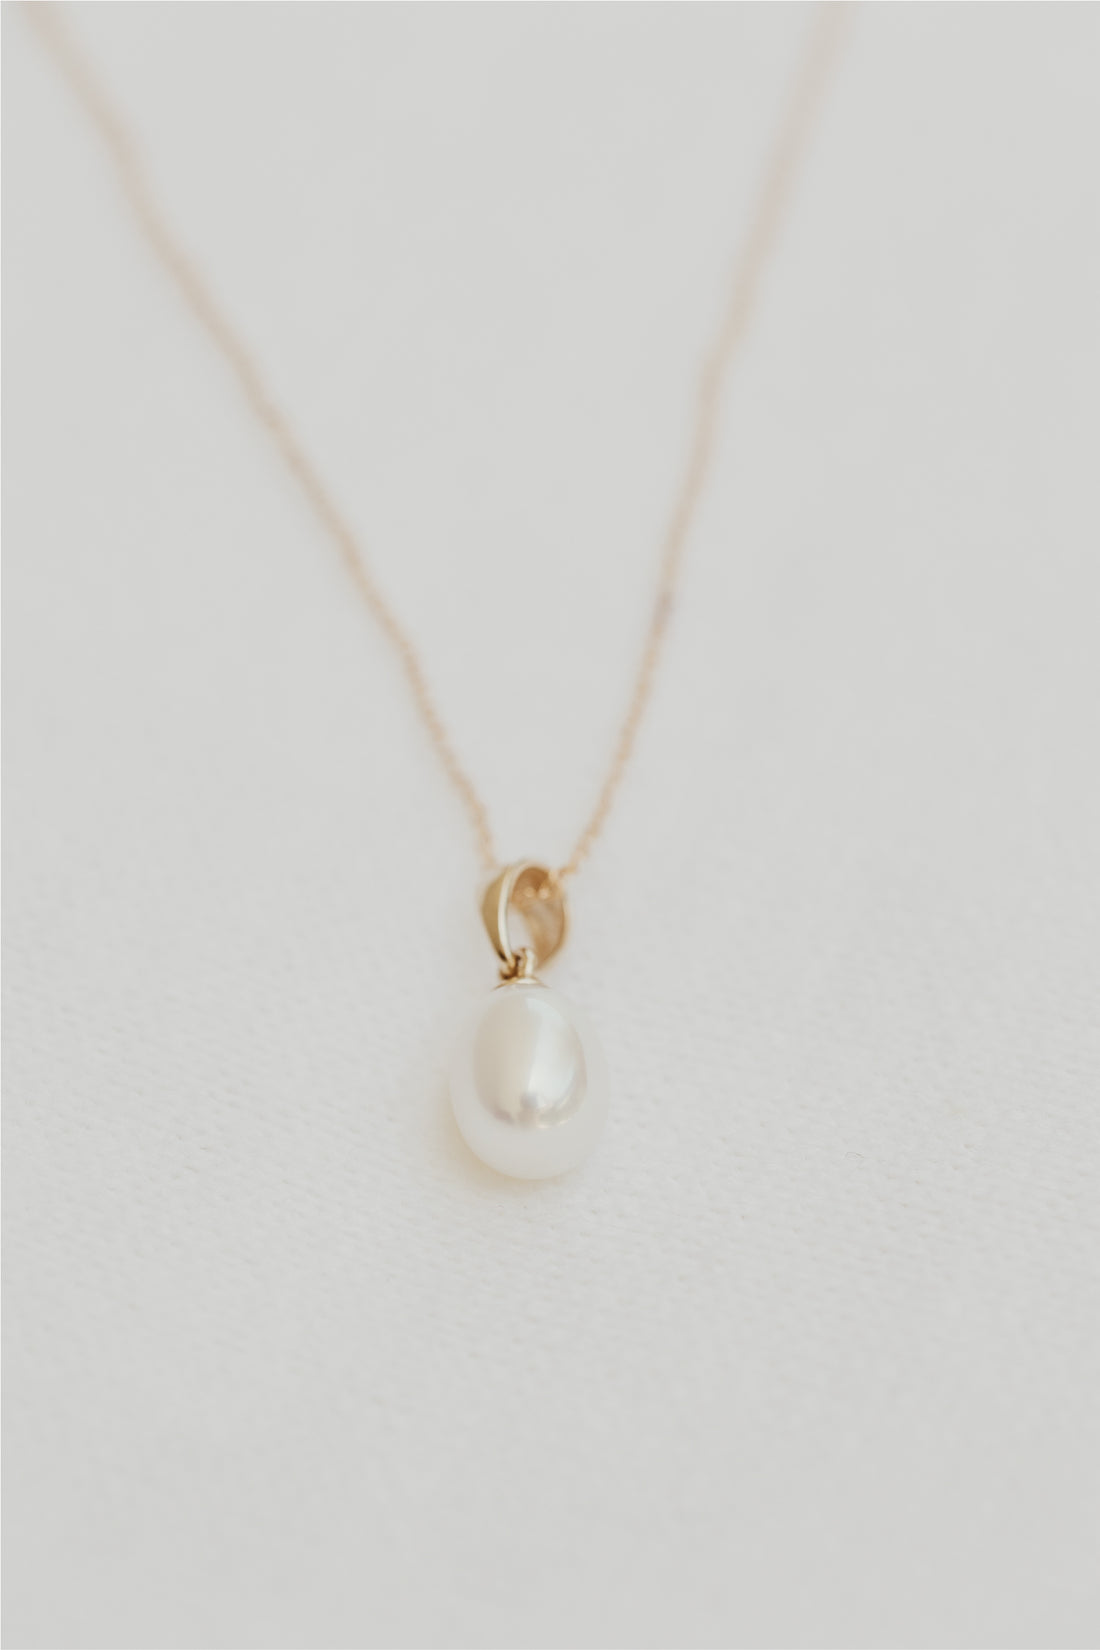 Coco Pearl Pendant with Gold Chain